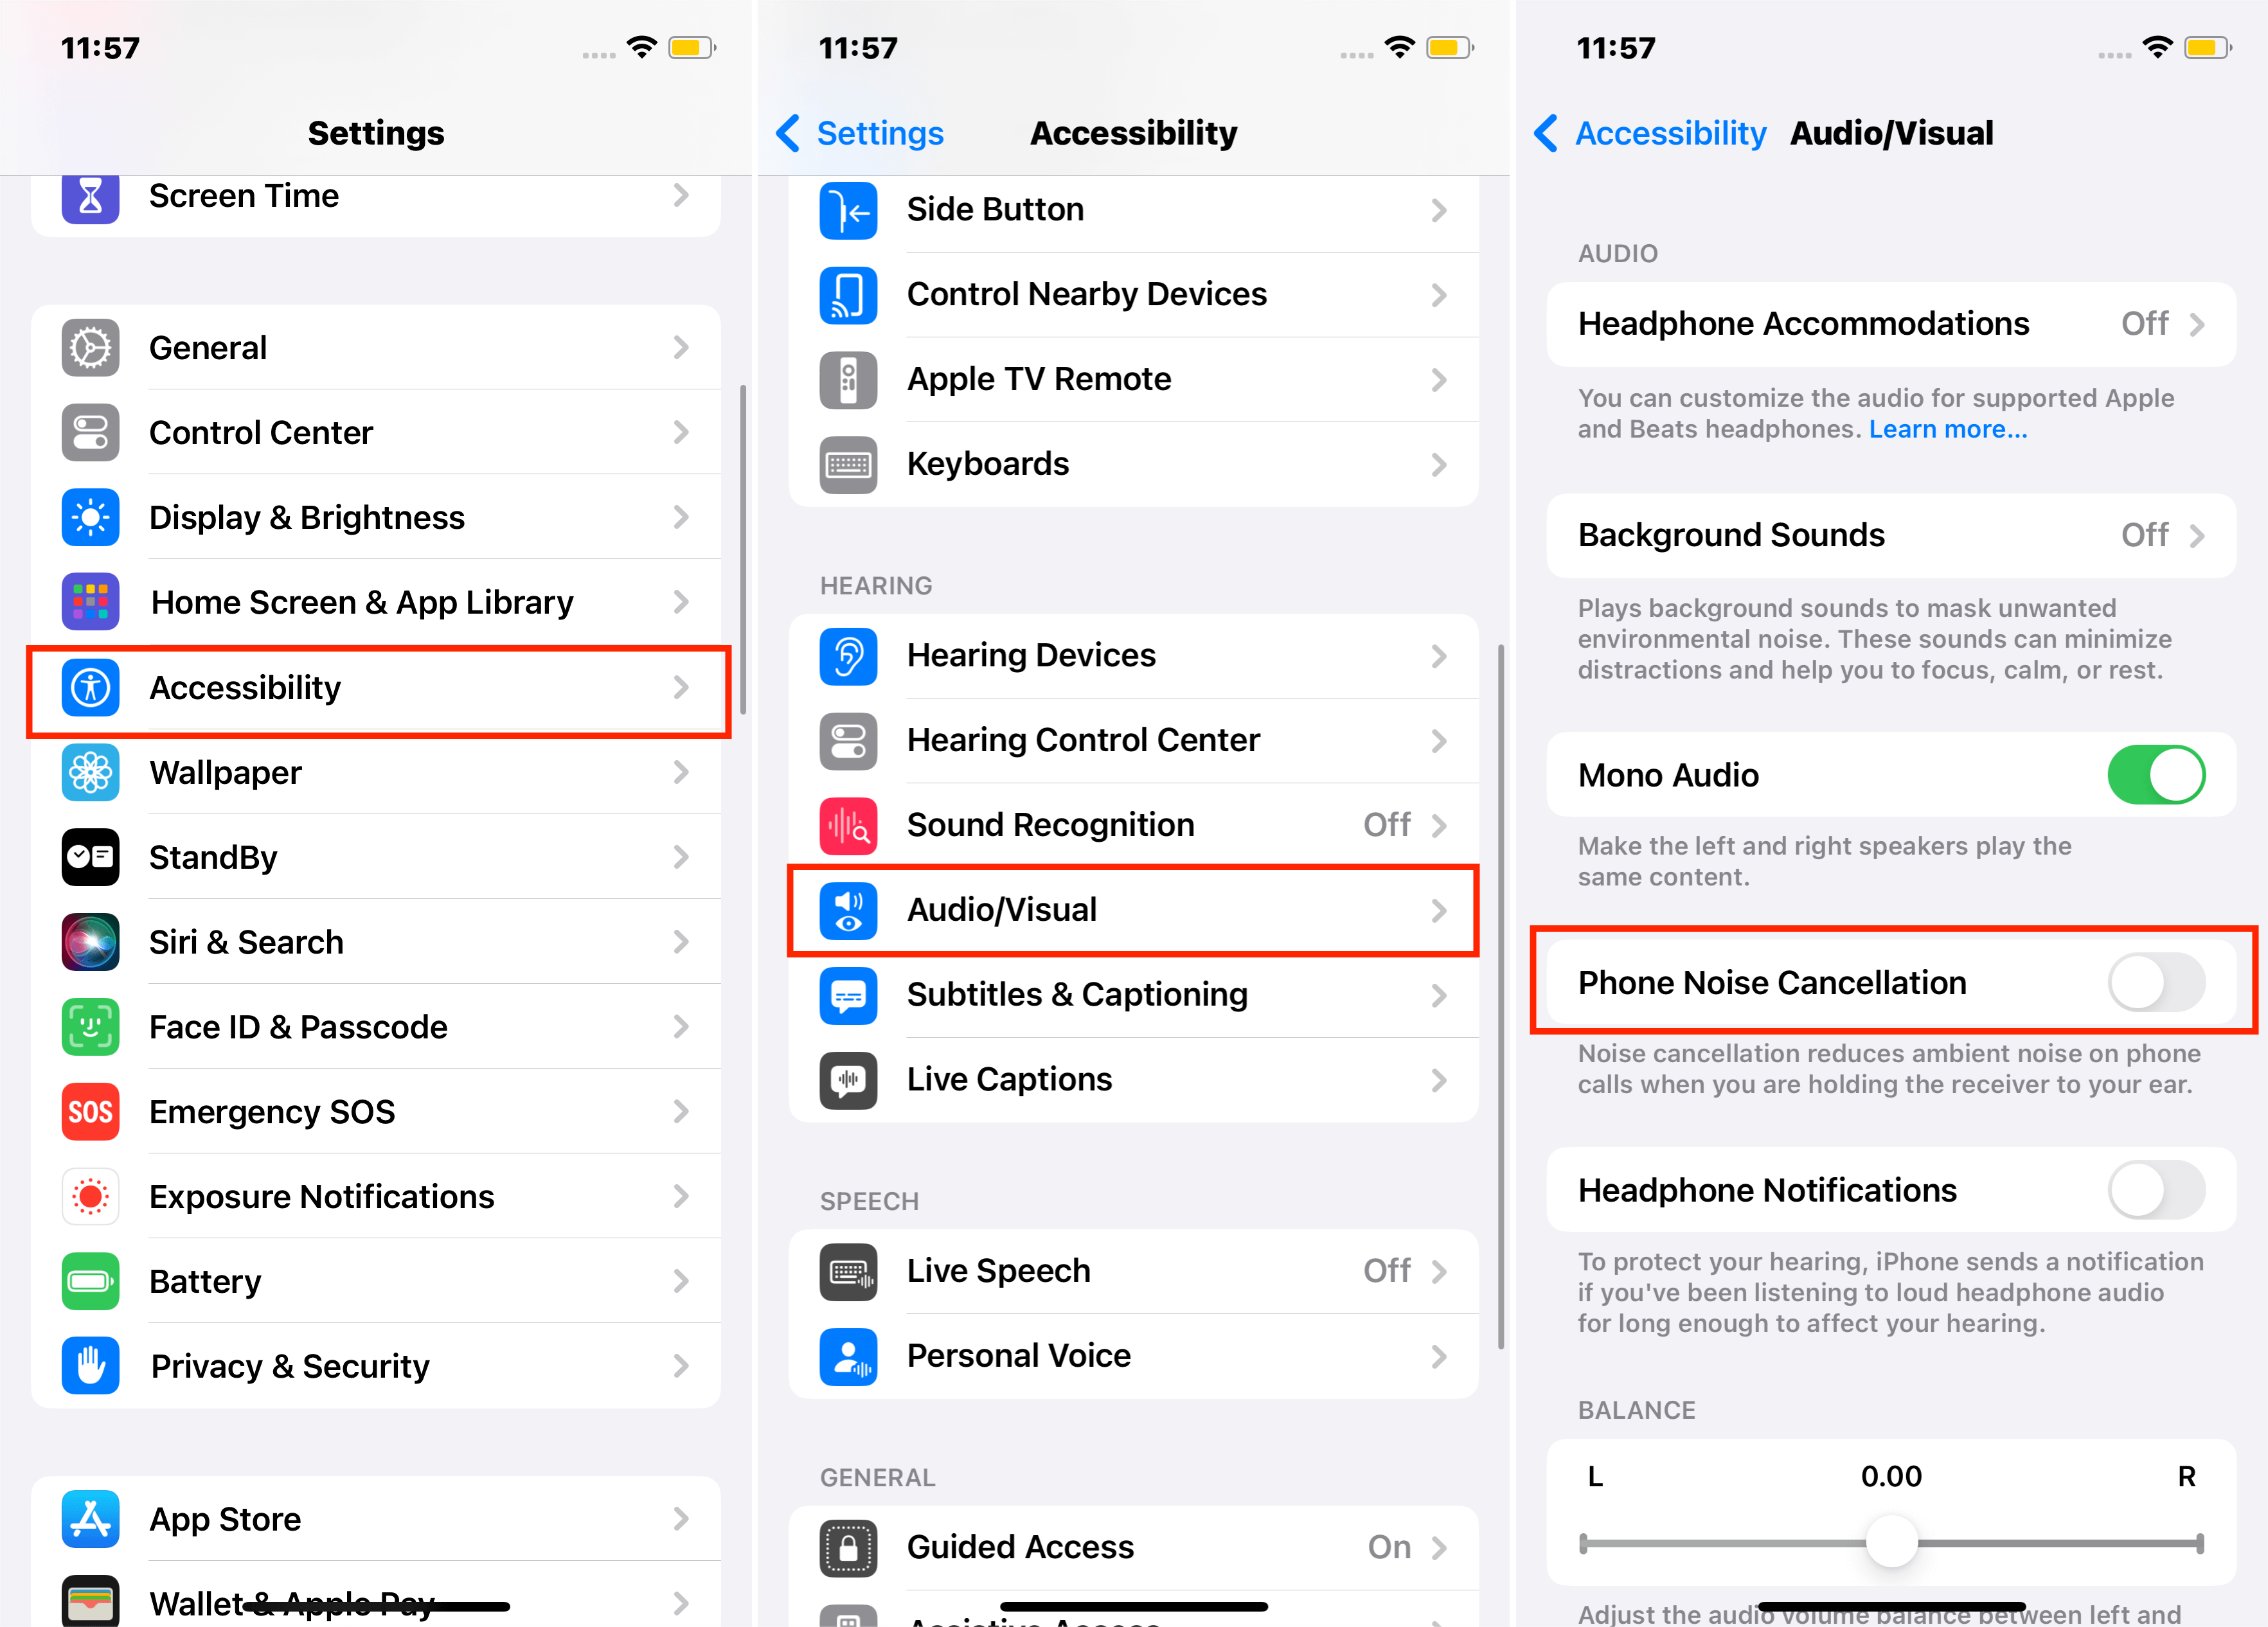 Steps To Turn Off Noise Cancellation Via Iphone Settings App